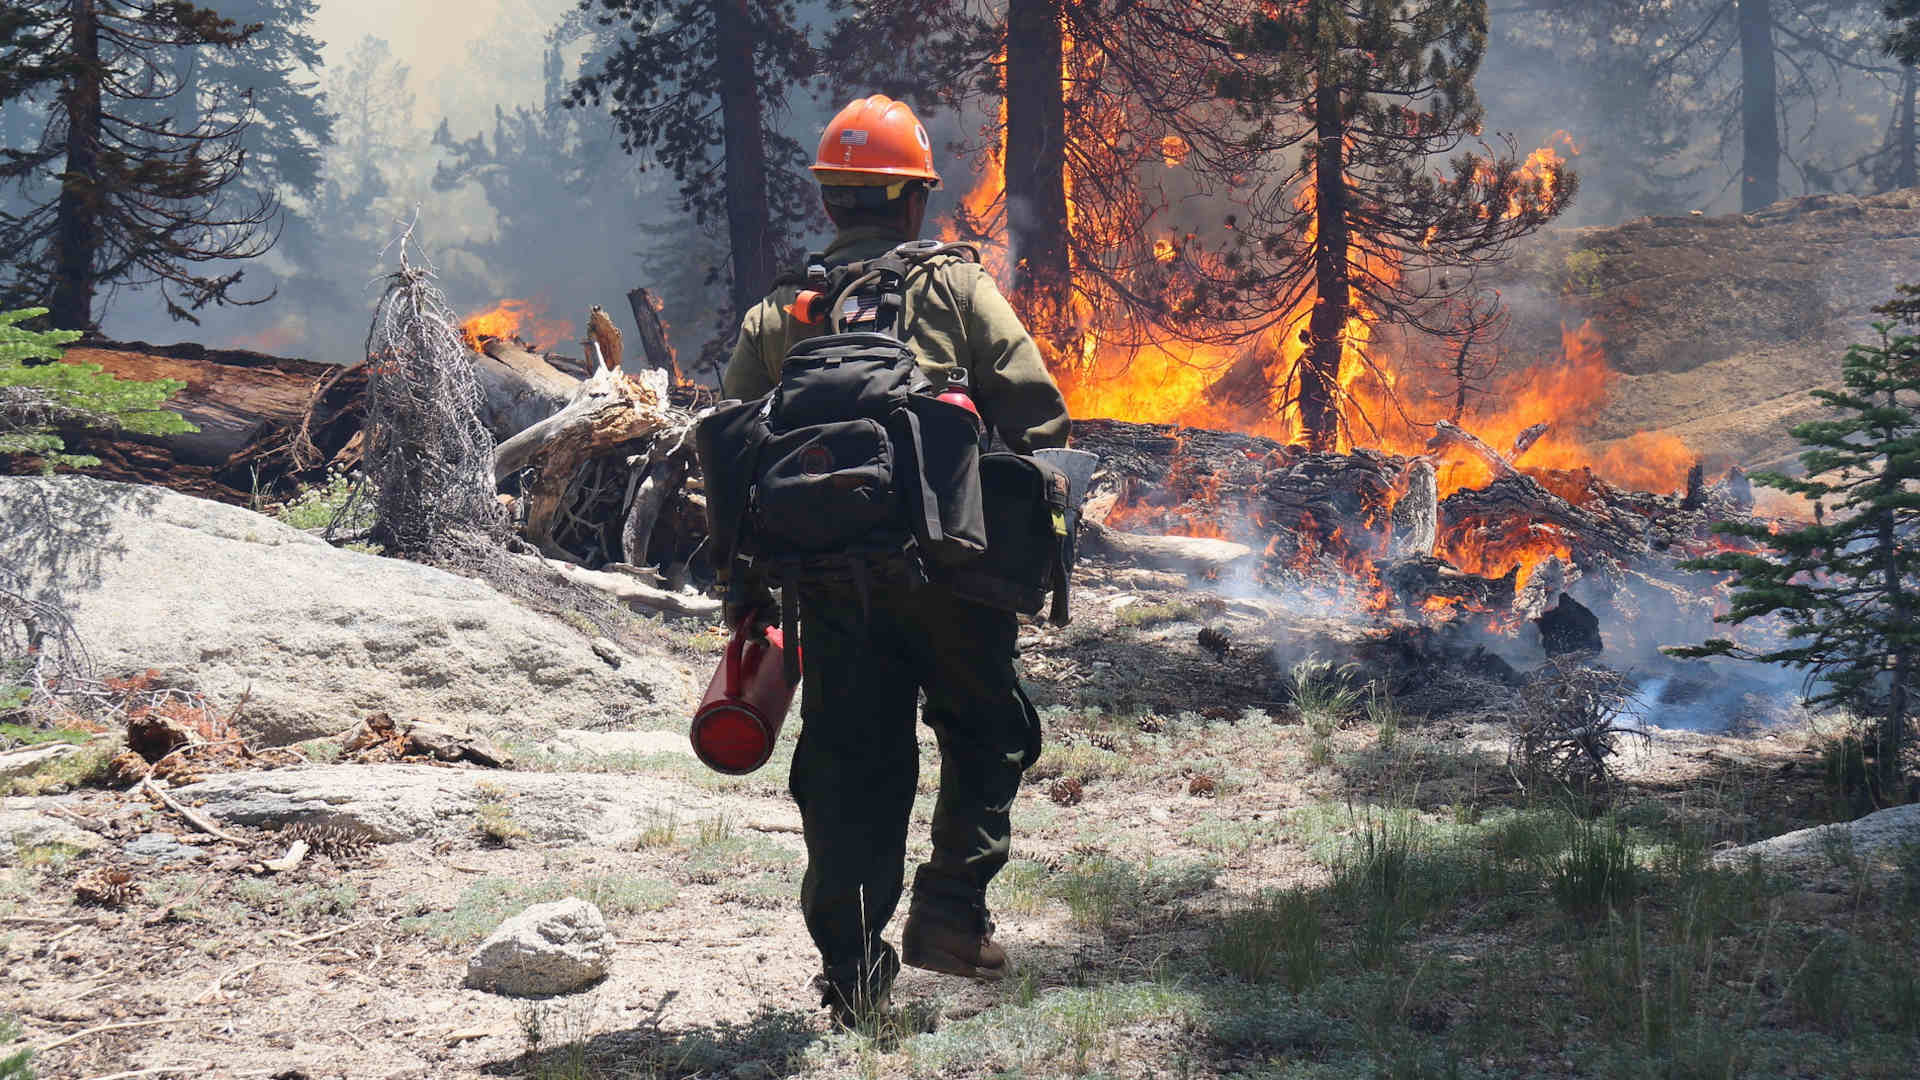 A wildland firefighter wearing a hardhat and backpack approaches trees and a downed log that are on fire.